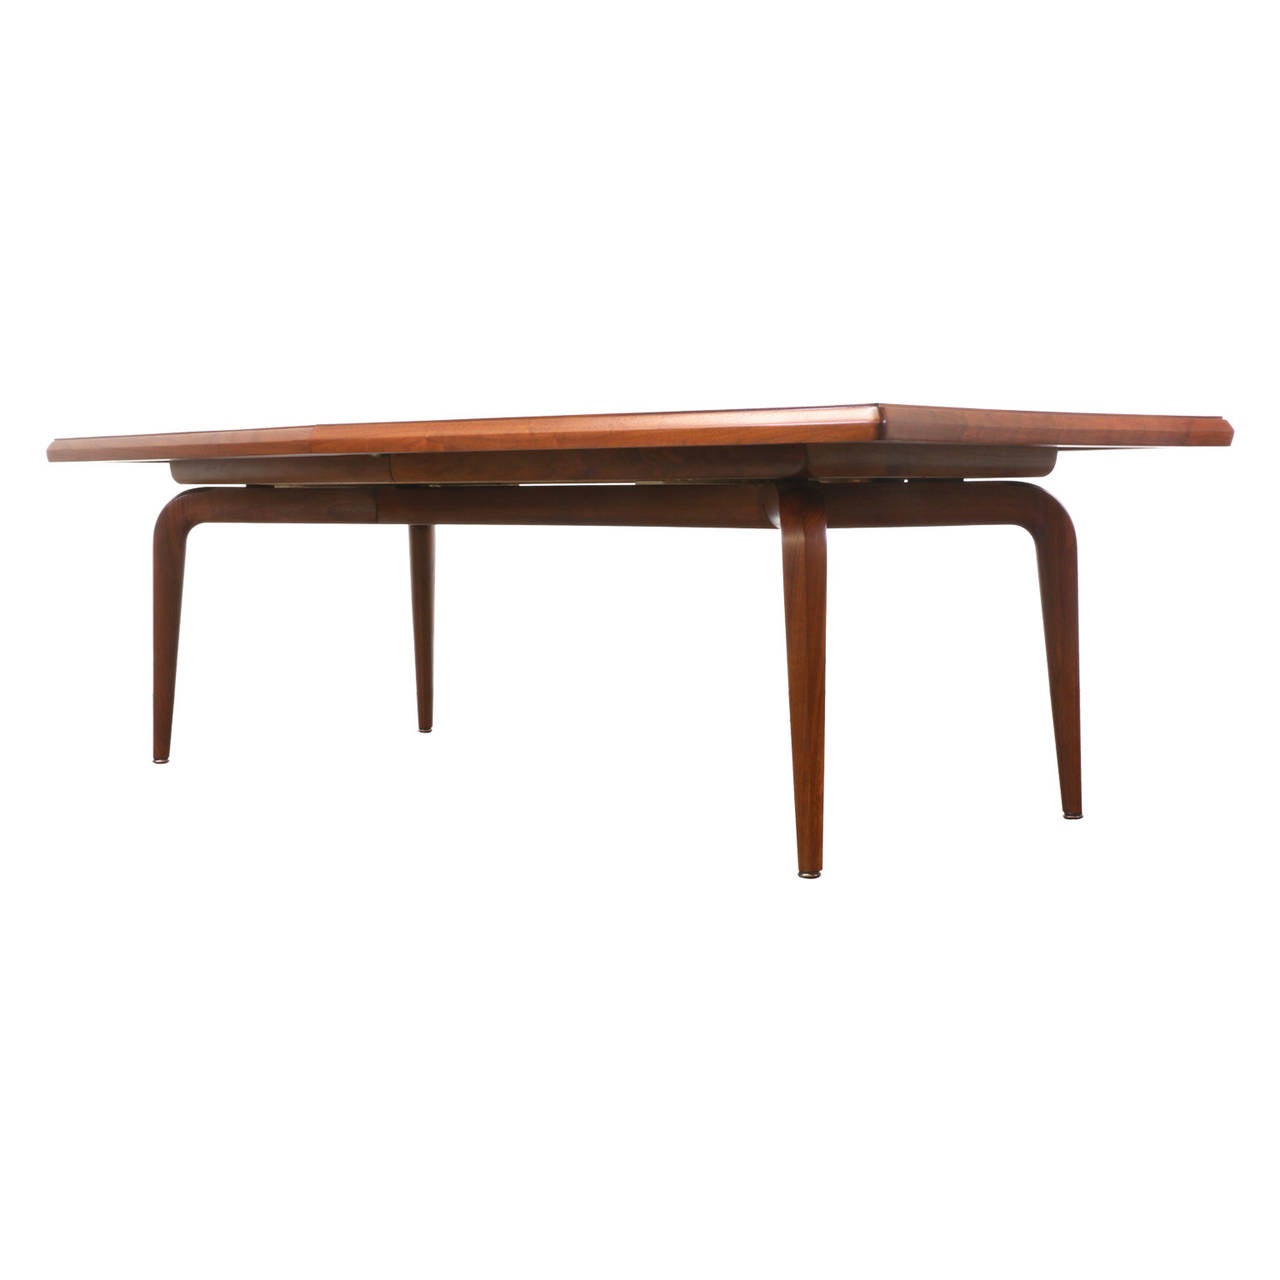 Designer: Maurice Bailey.
Manufacturer: Monteverdi-Young.
Period or Style: Mid-Century Modern.
Country: United States.
Date: 1960s.

Dimensions: 30″ H x 96″ L x 51″ W.
Extension Leave 24″– expands up to 120″ L.
Materials: Walnut.
Condition: